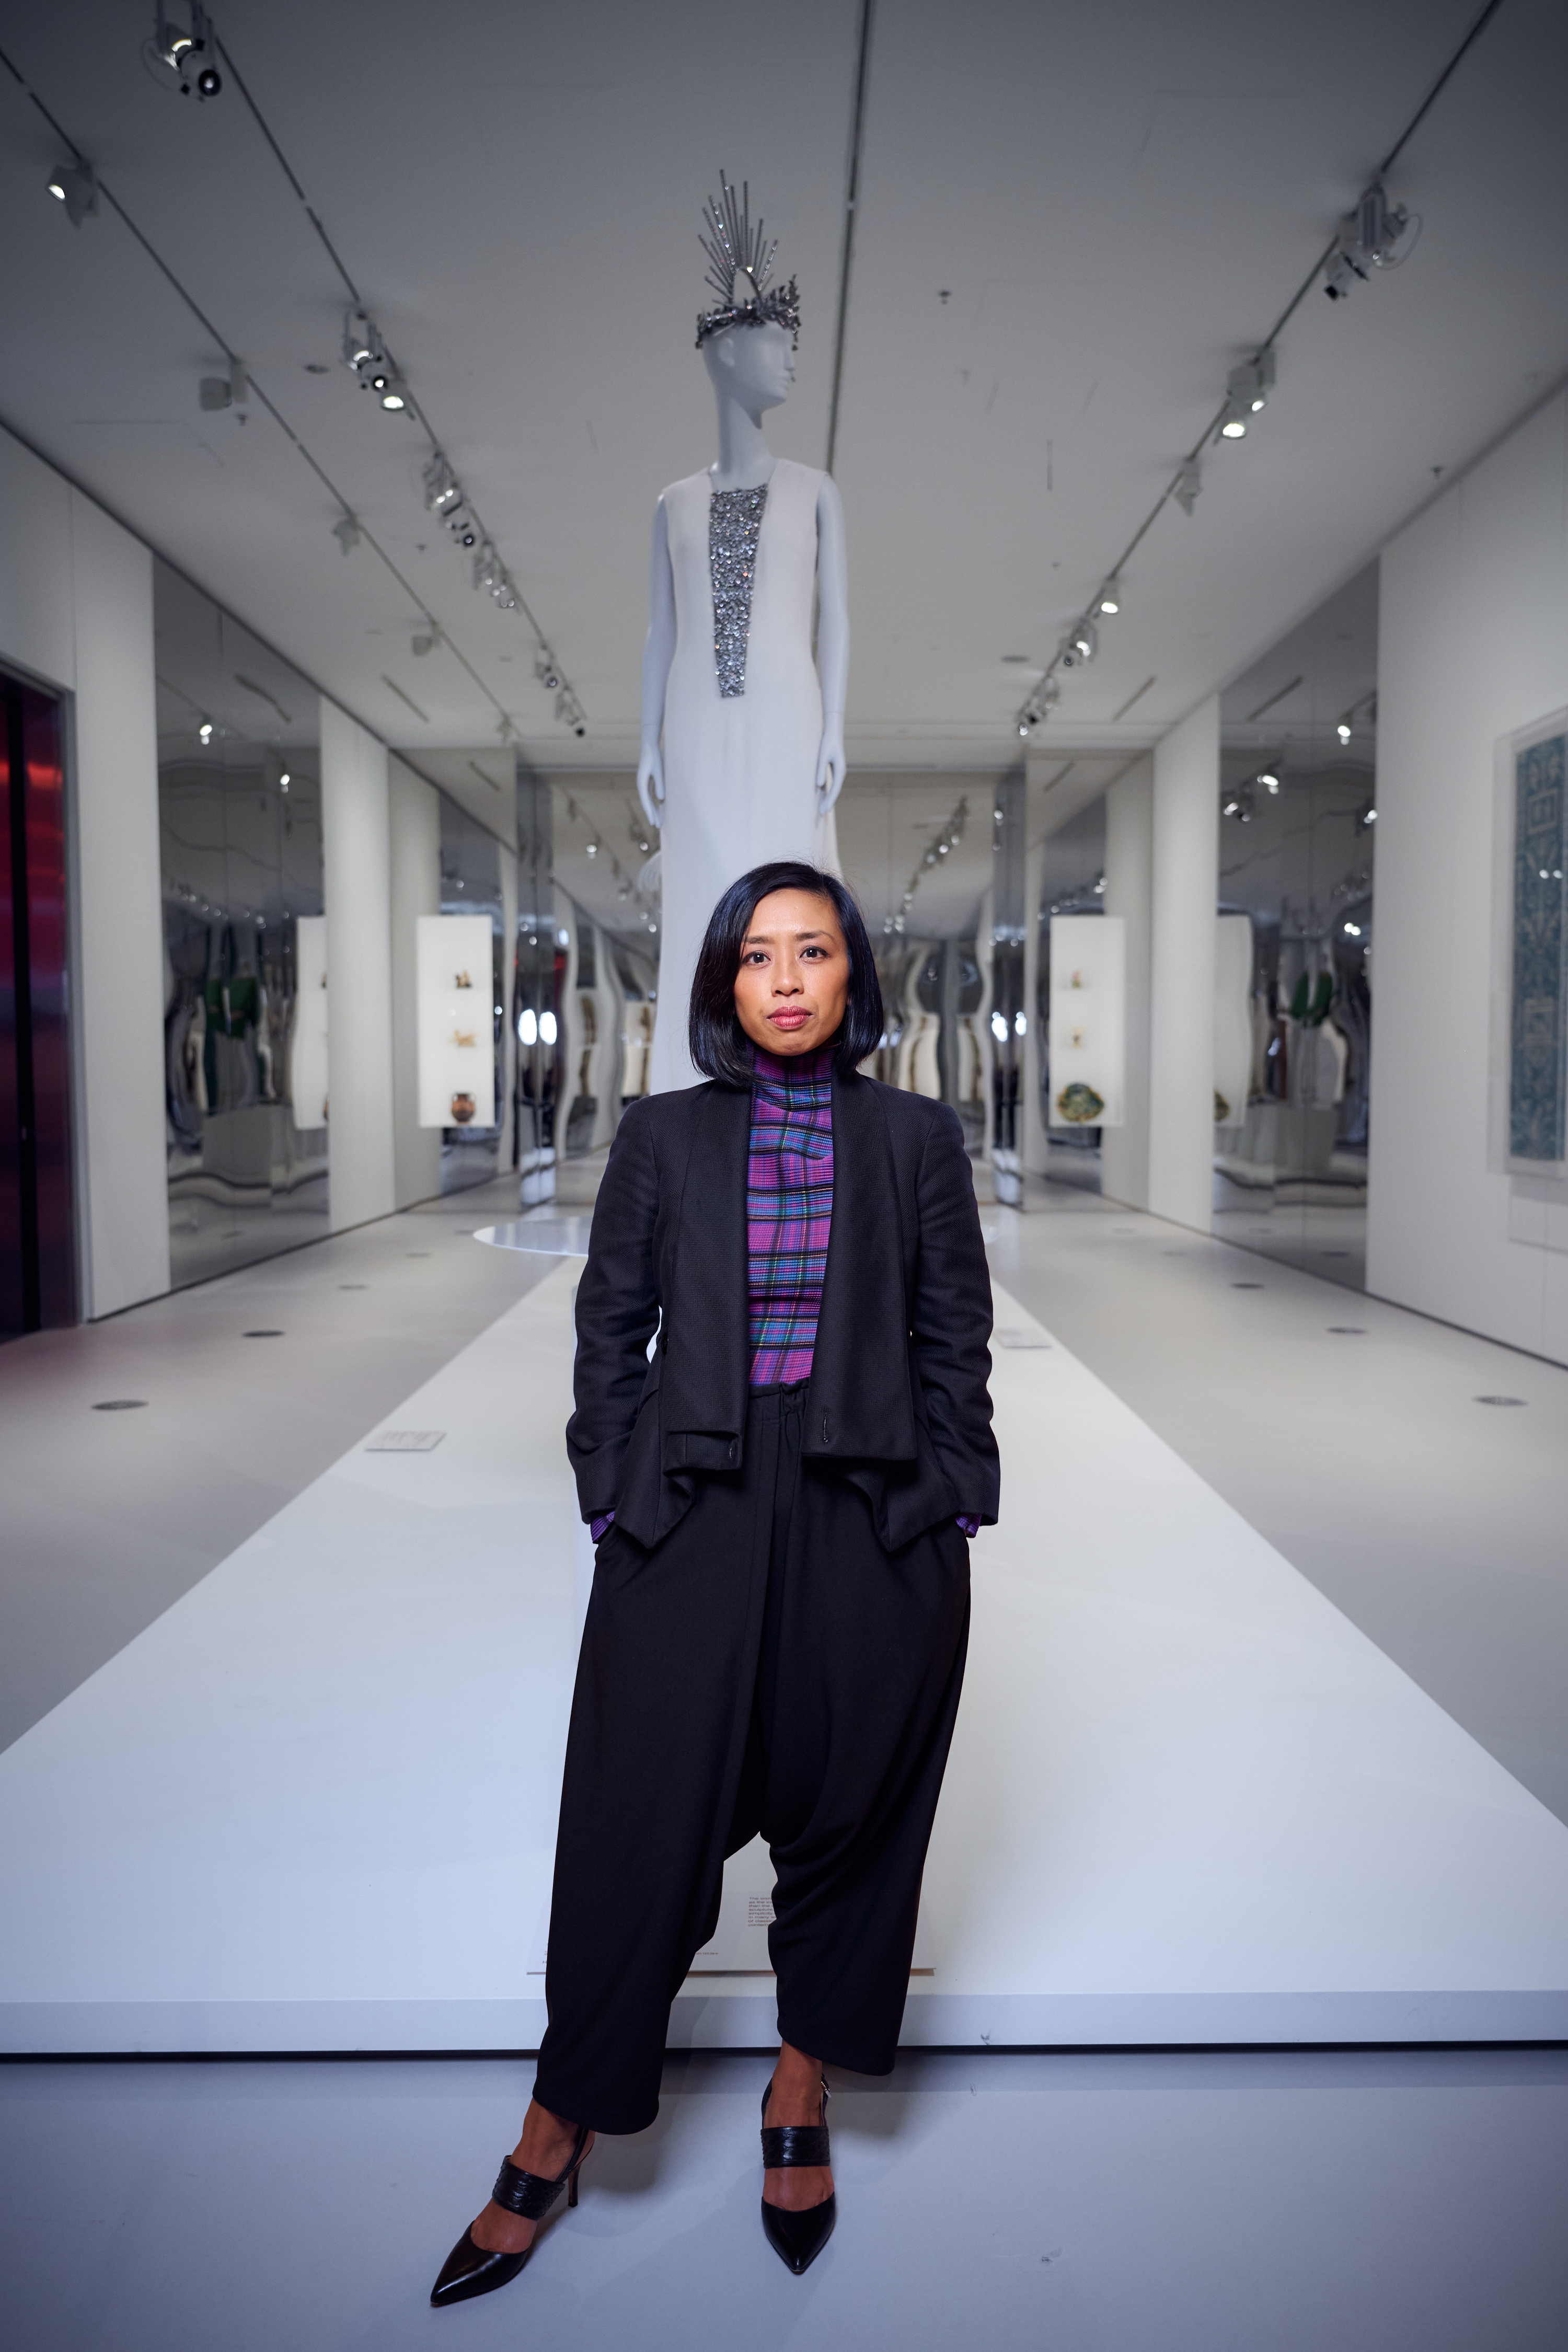 Asian woman with short dark hair wears a vibrant checkered purple shirt under a sleek black coat and pants in a gallery.